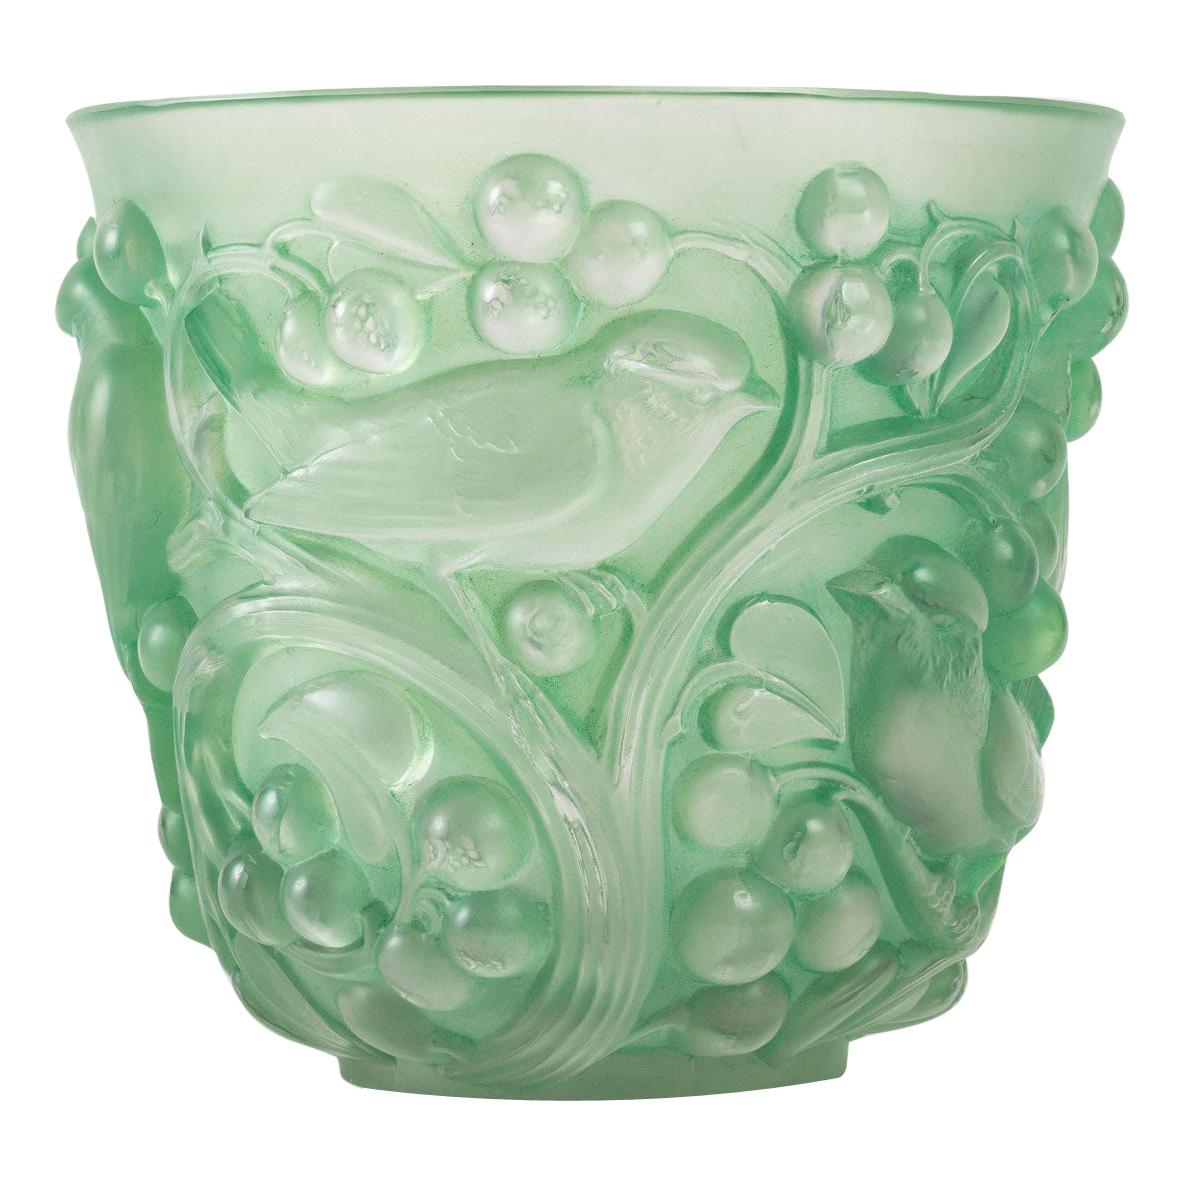 1927 René Lalique Avallon Vase in Frosted Glass with Green Patina Sparrows Birds